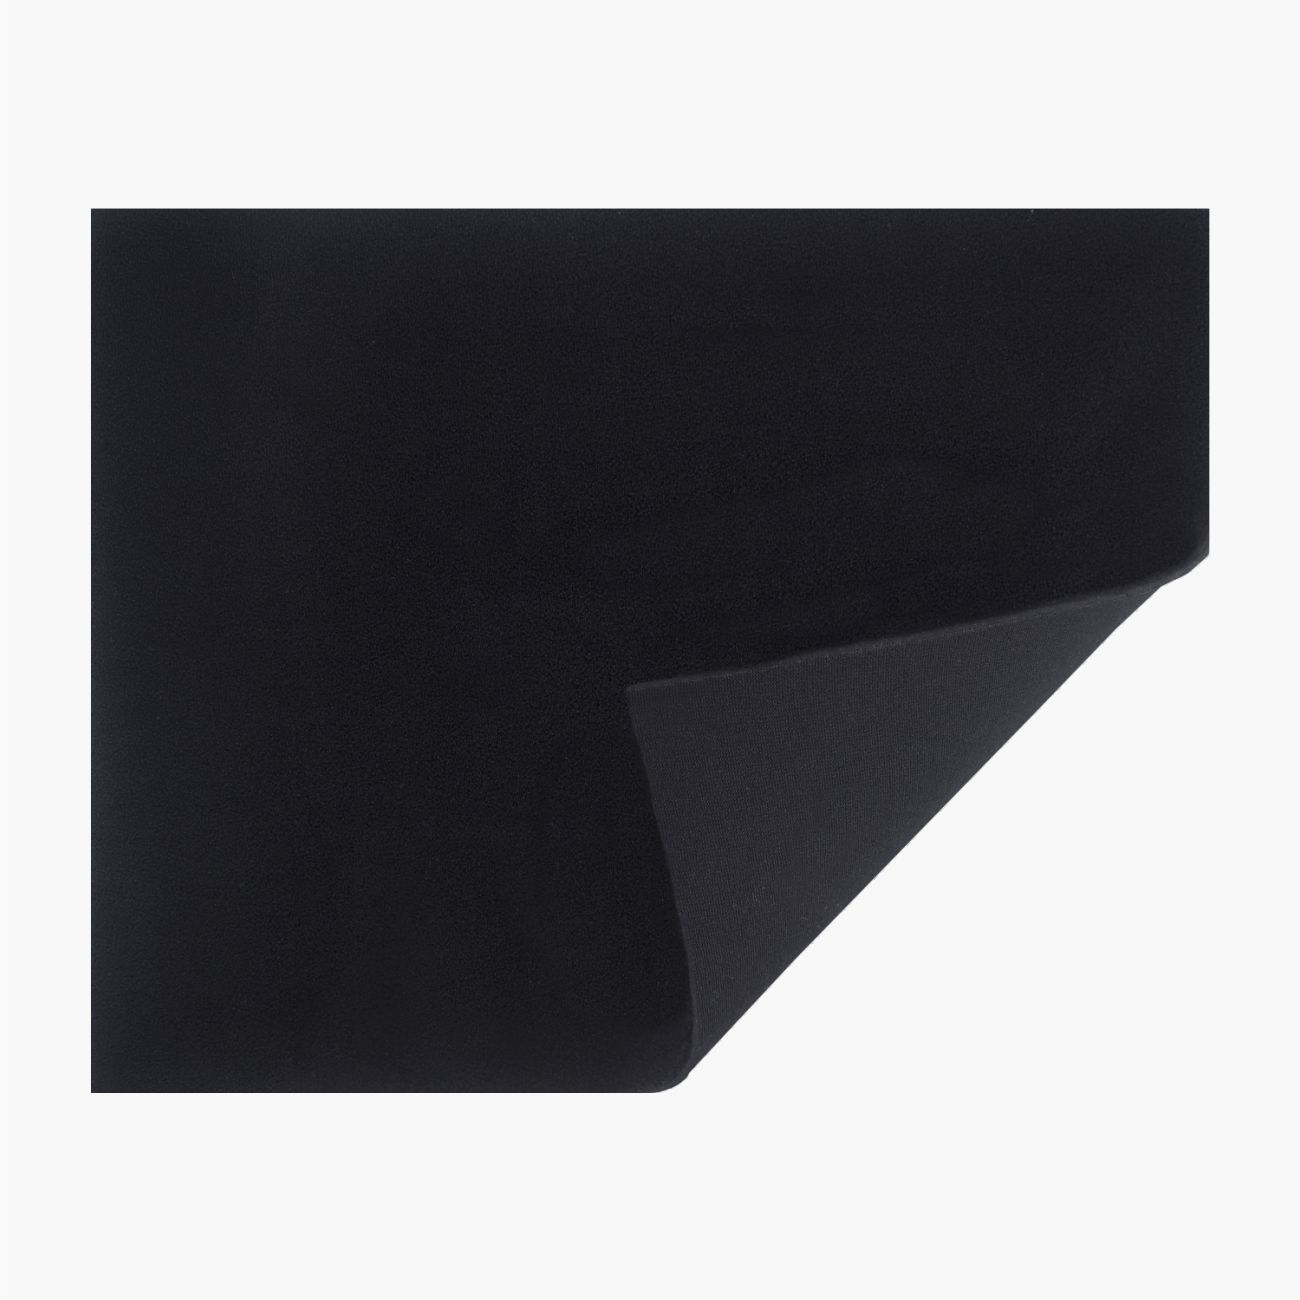 SMALL Neoprene Sheets 3mm Double Lined 230mm x 300mm - BLACK